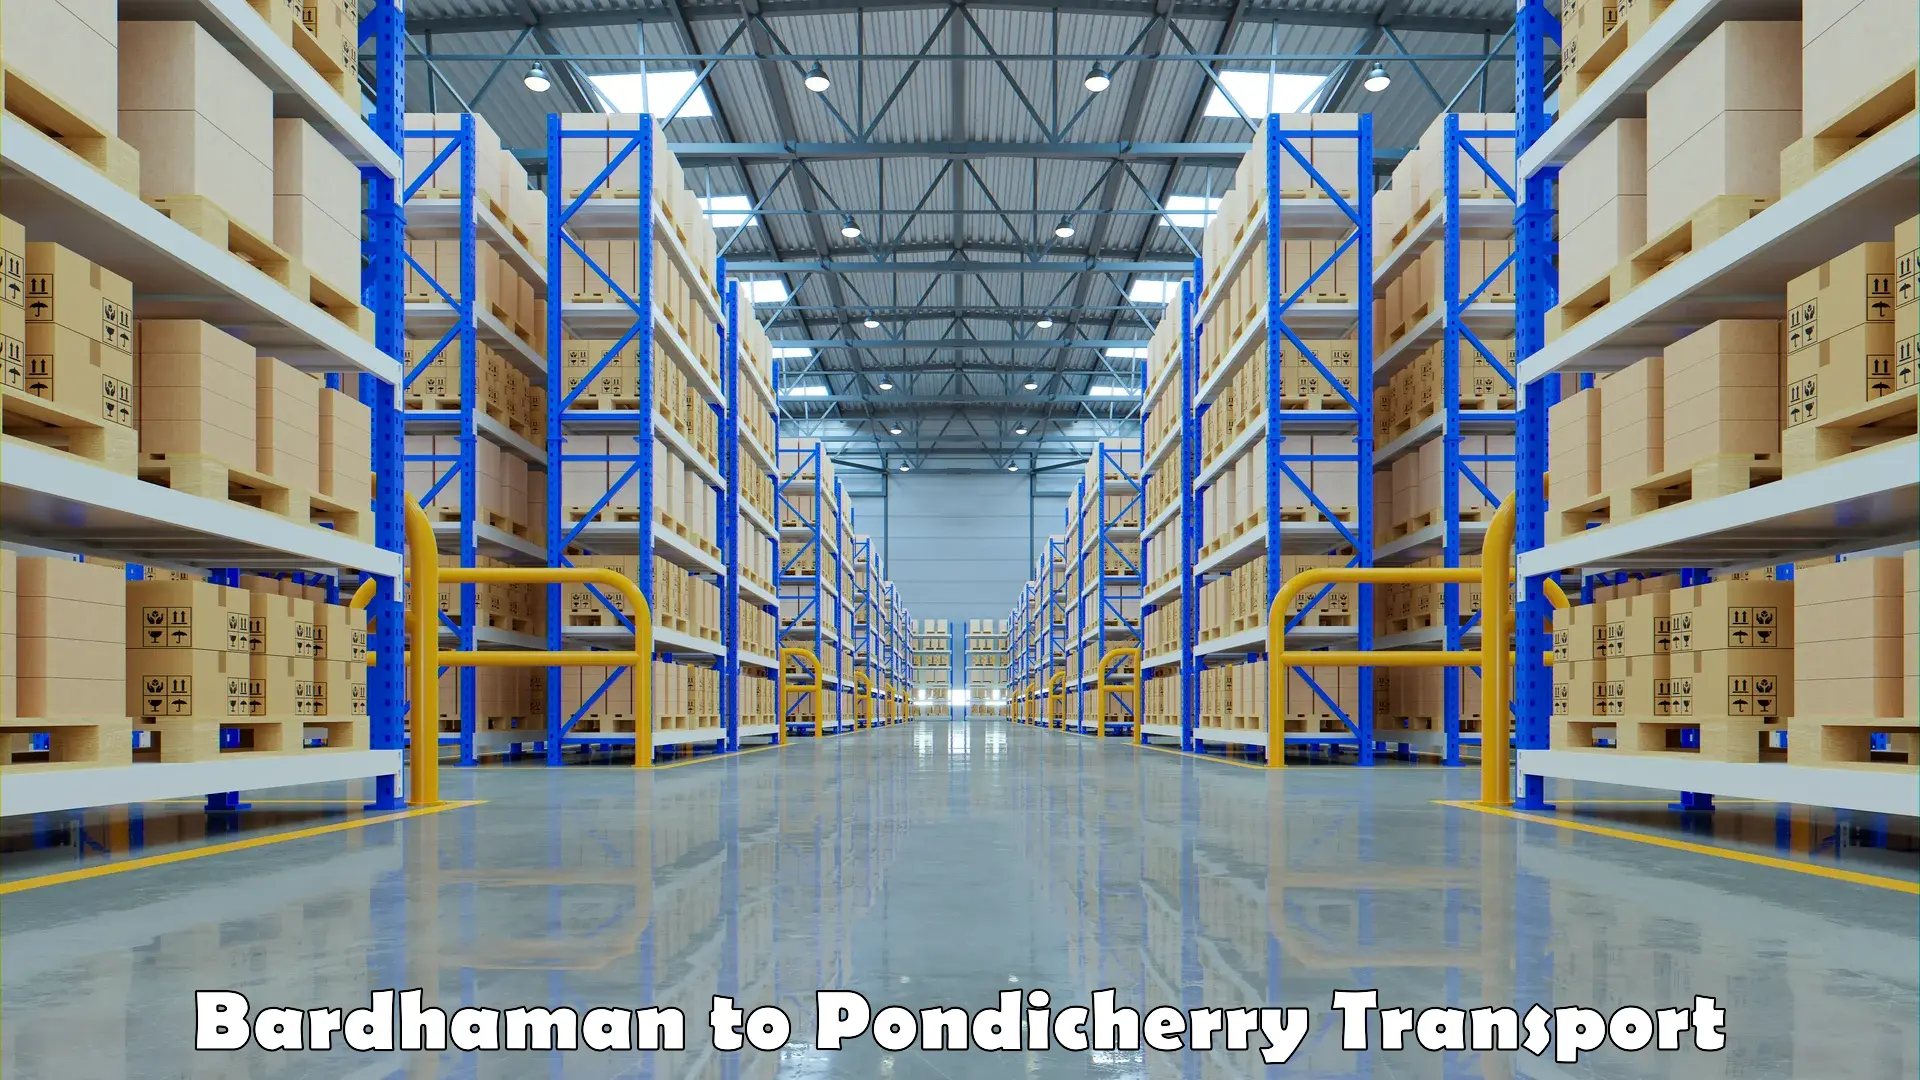 Air freight transport services Bardhaman to Pondicherry